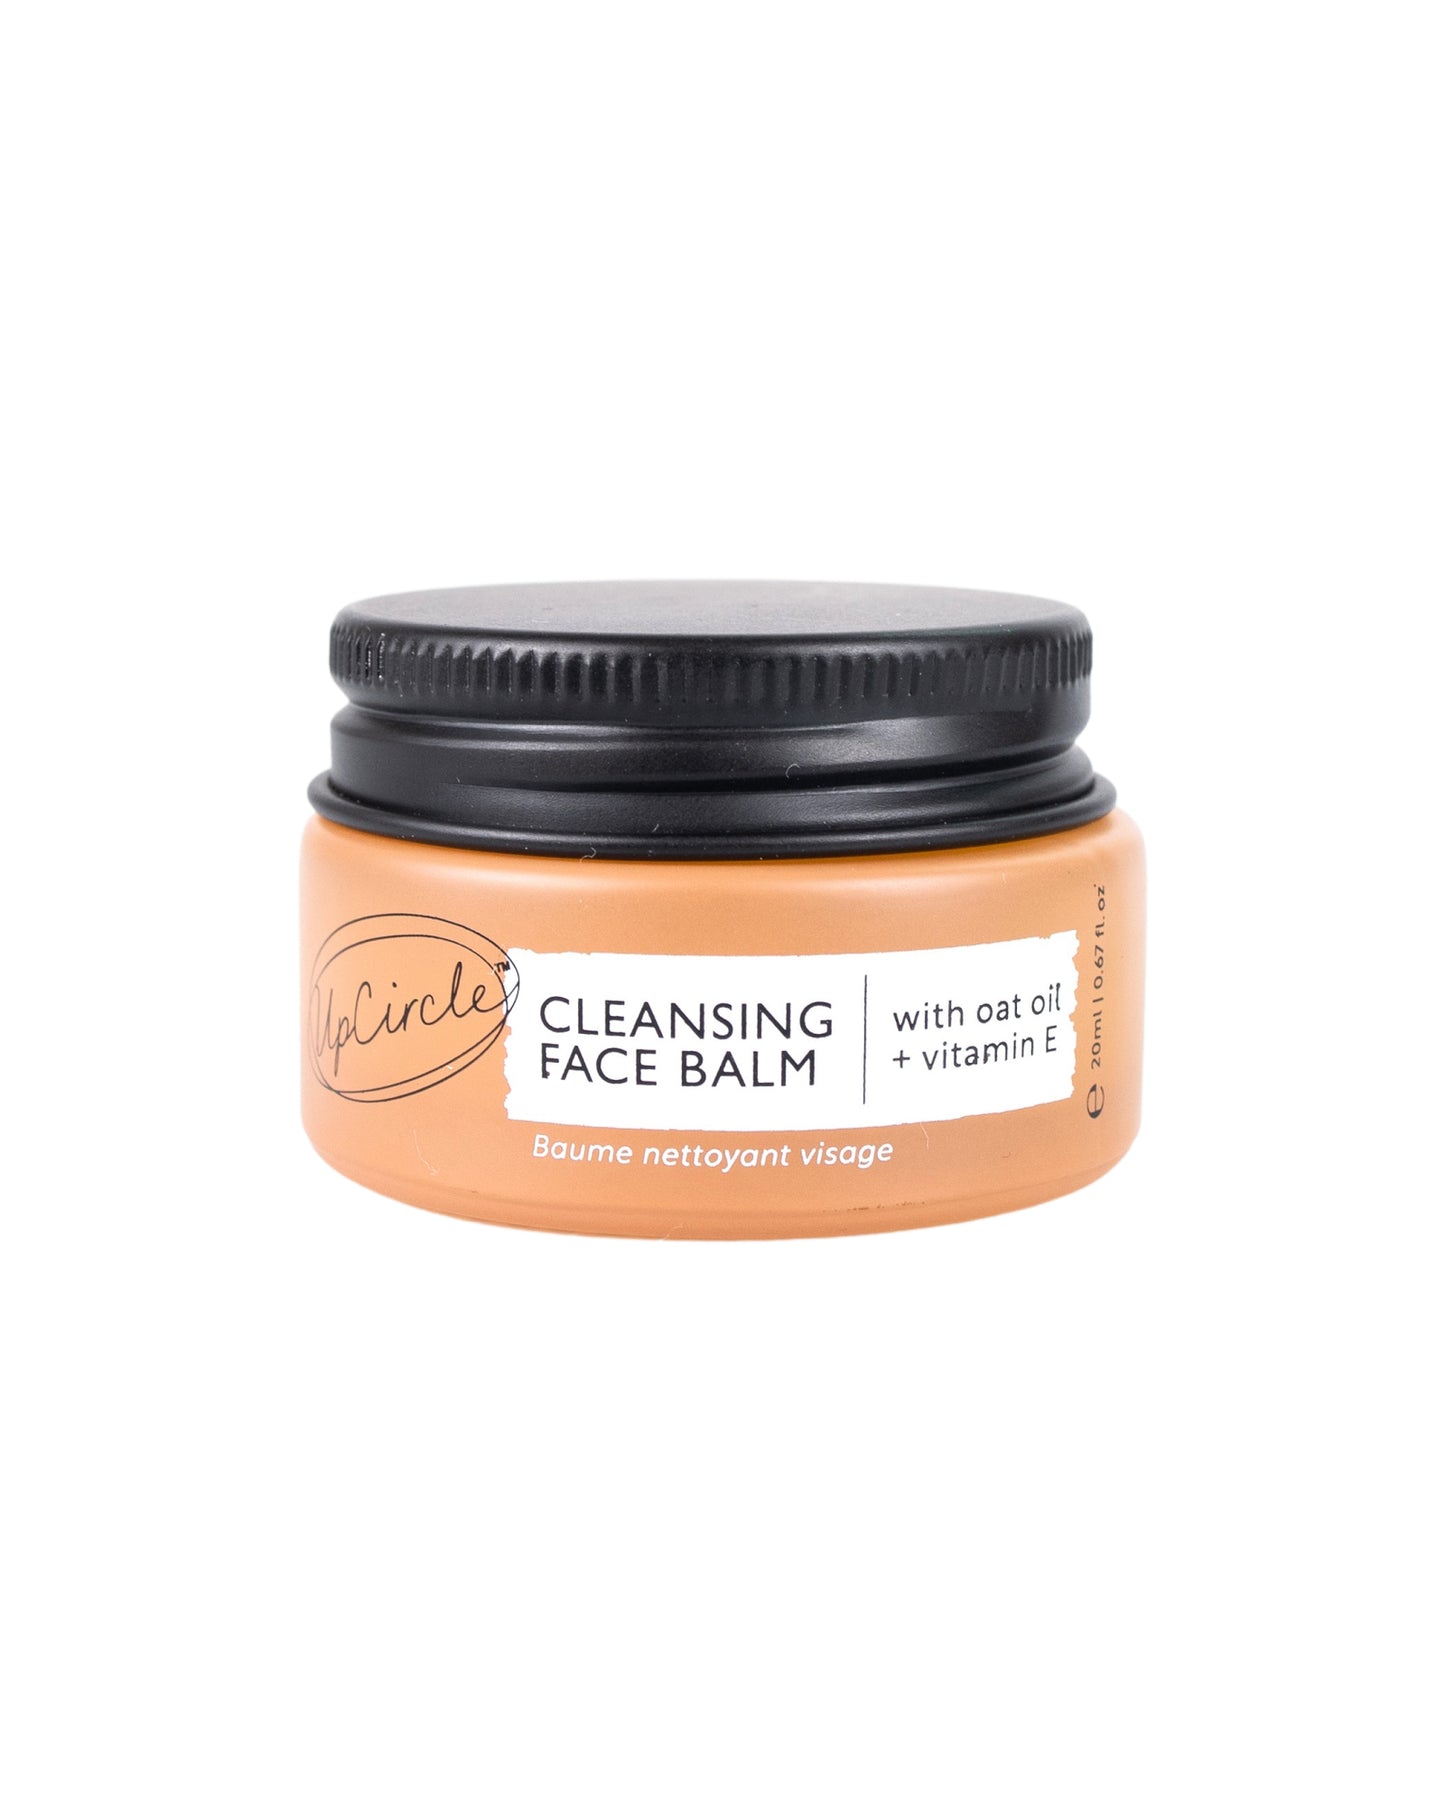 Cleansing Face Balm with Oat Oil & Vitamin E - Travel Size